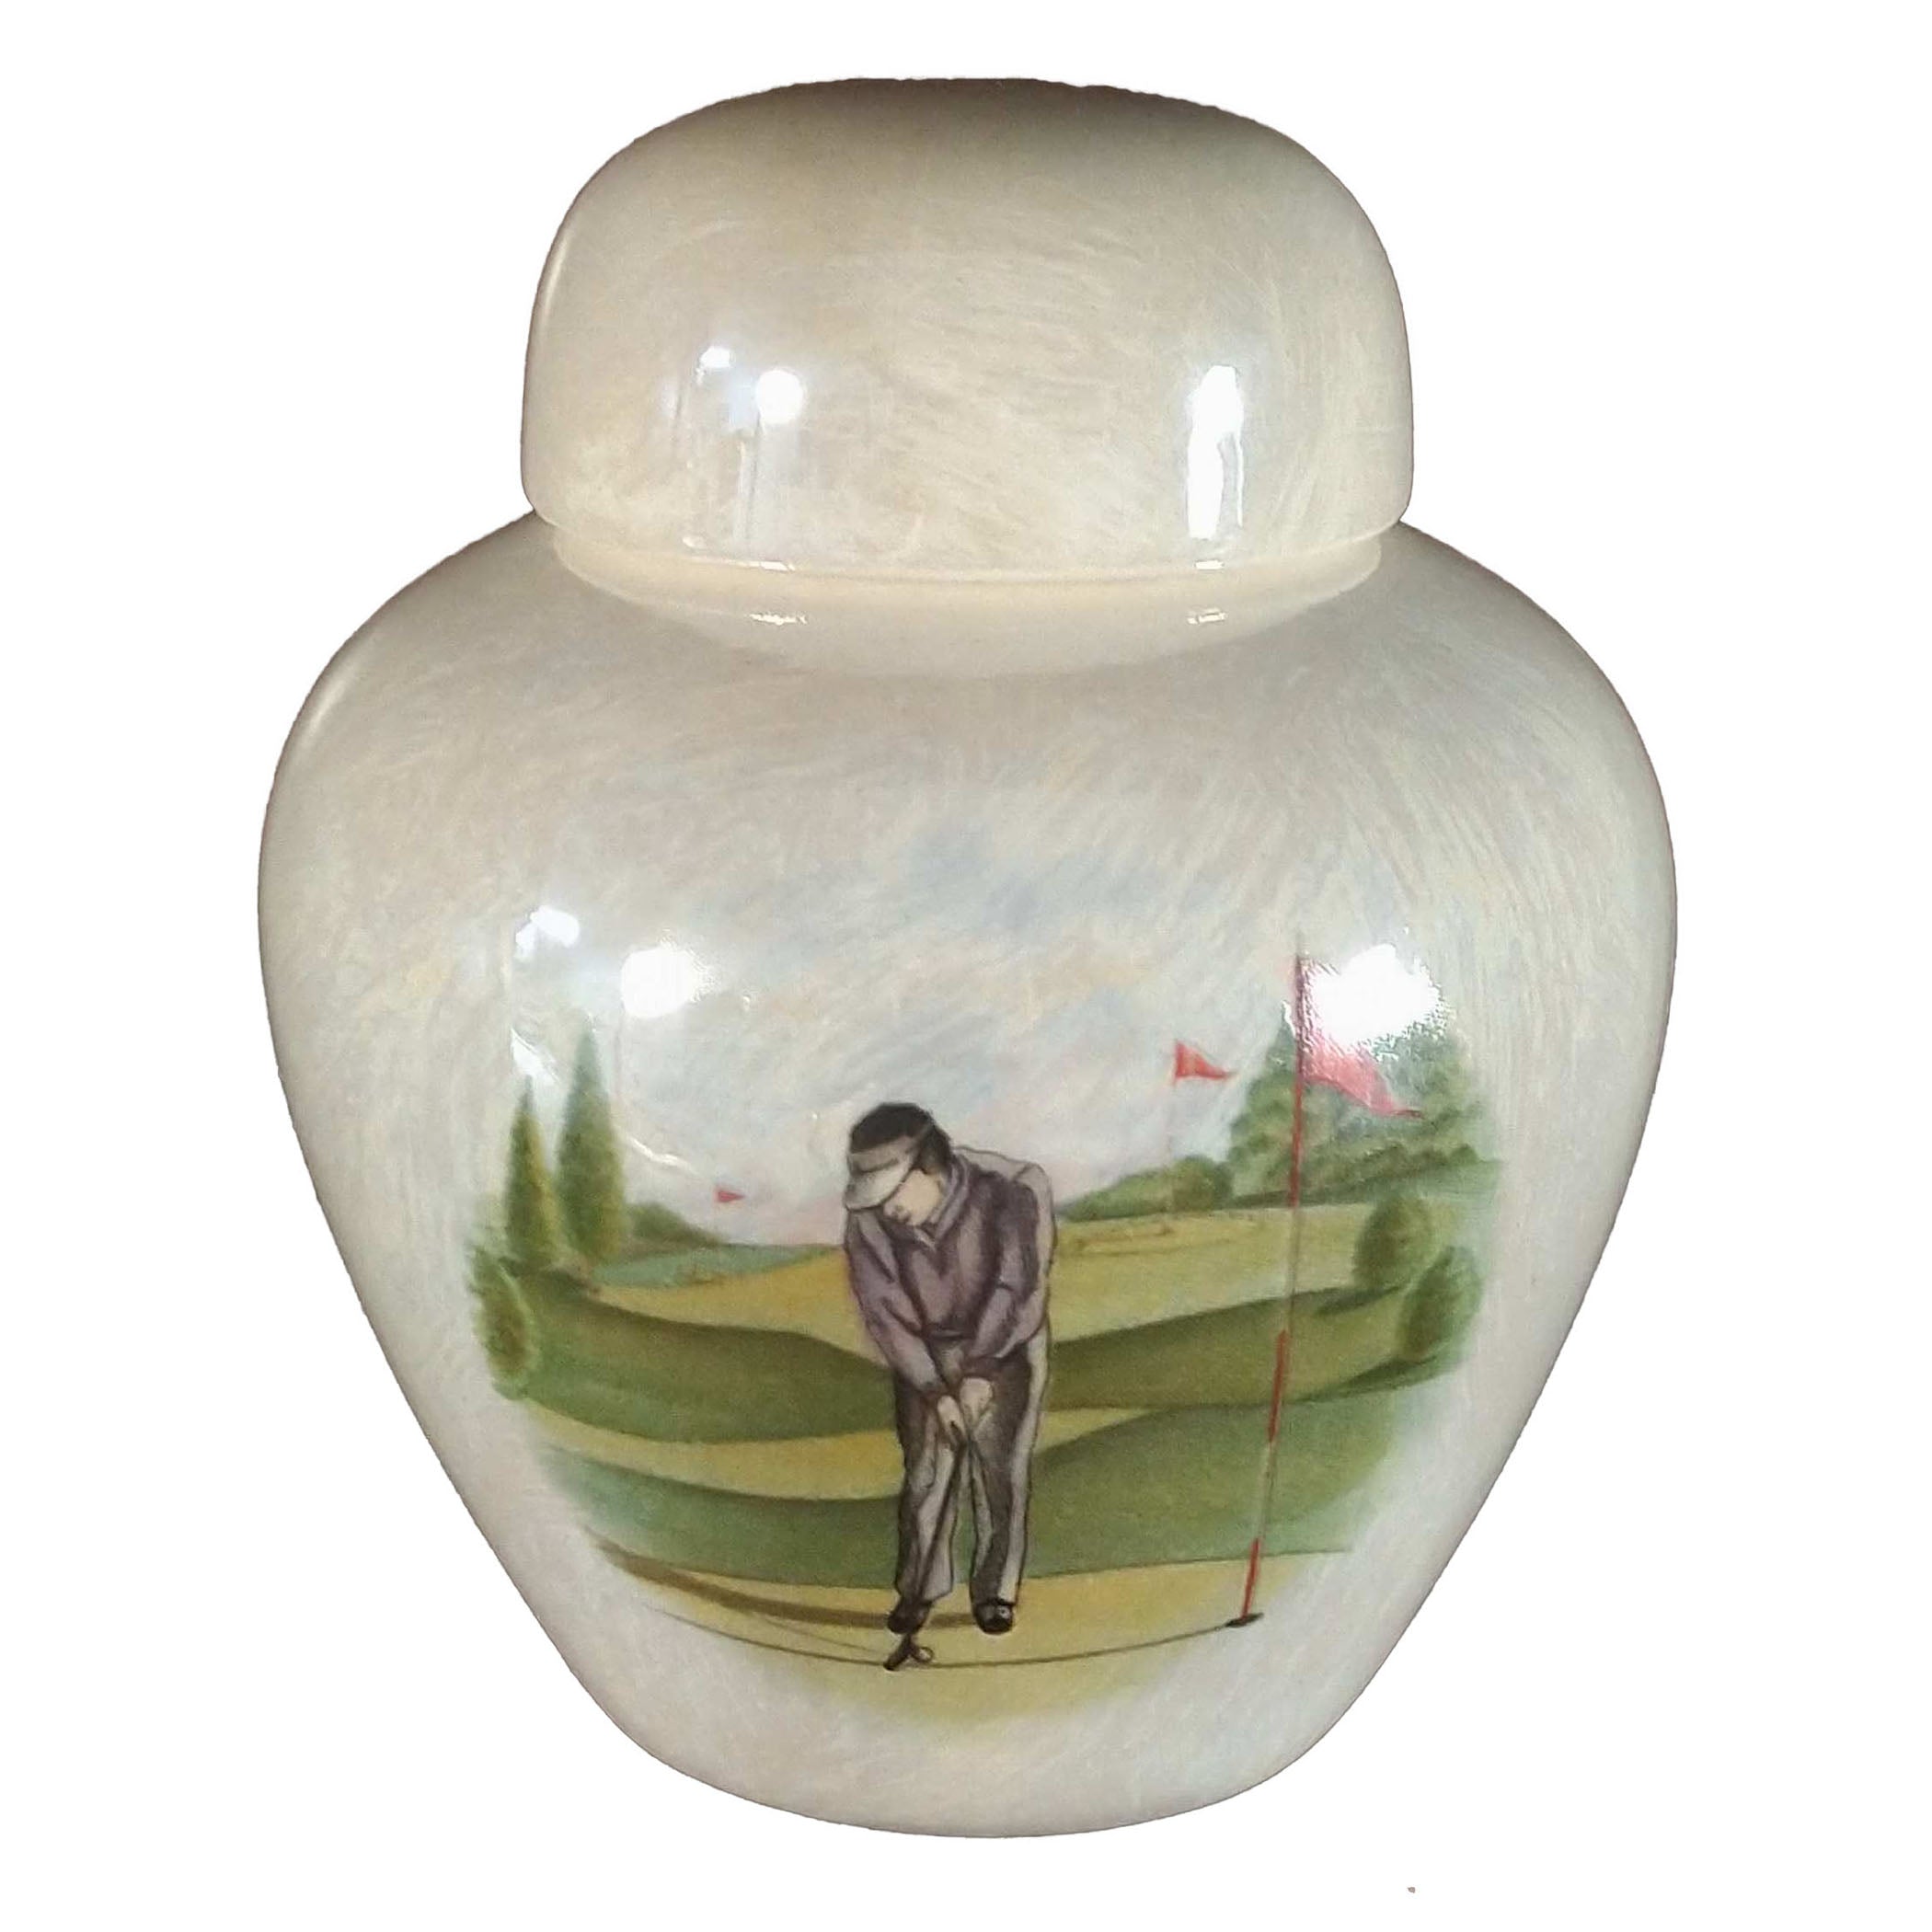 Collection of keepsake urns, this one with an image of golfer putting on a green. | Heartland Urns and Keepsakes